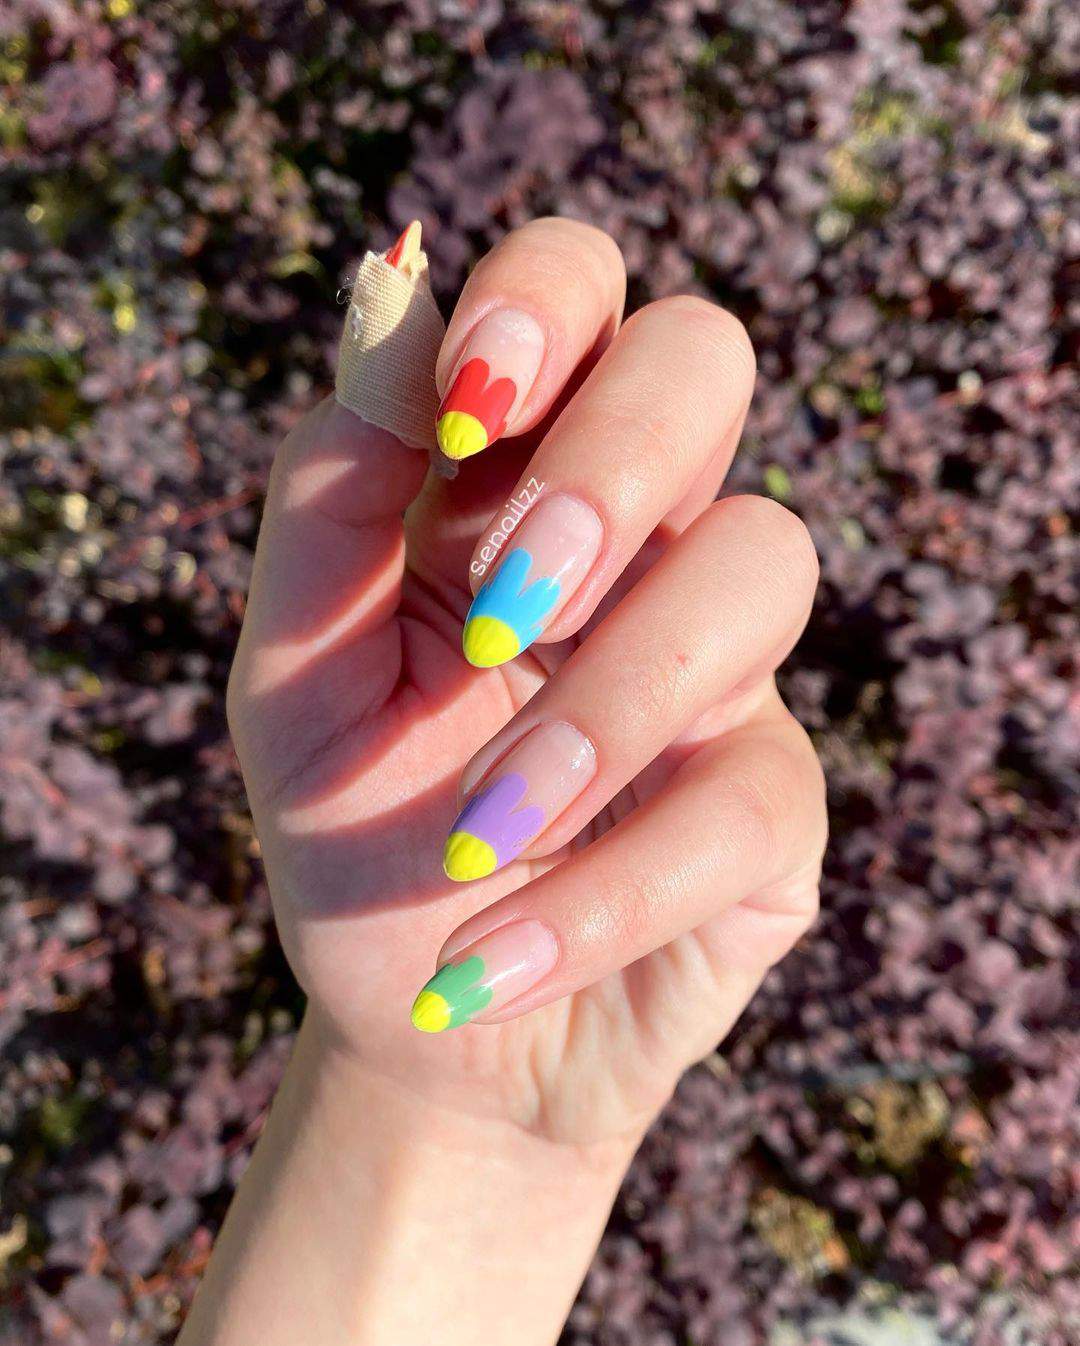 The 100+ Best Nail Designs Trends And Ideas In 2021 images 13